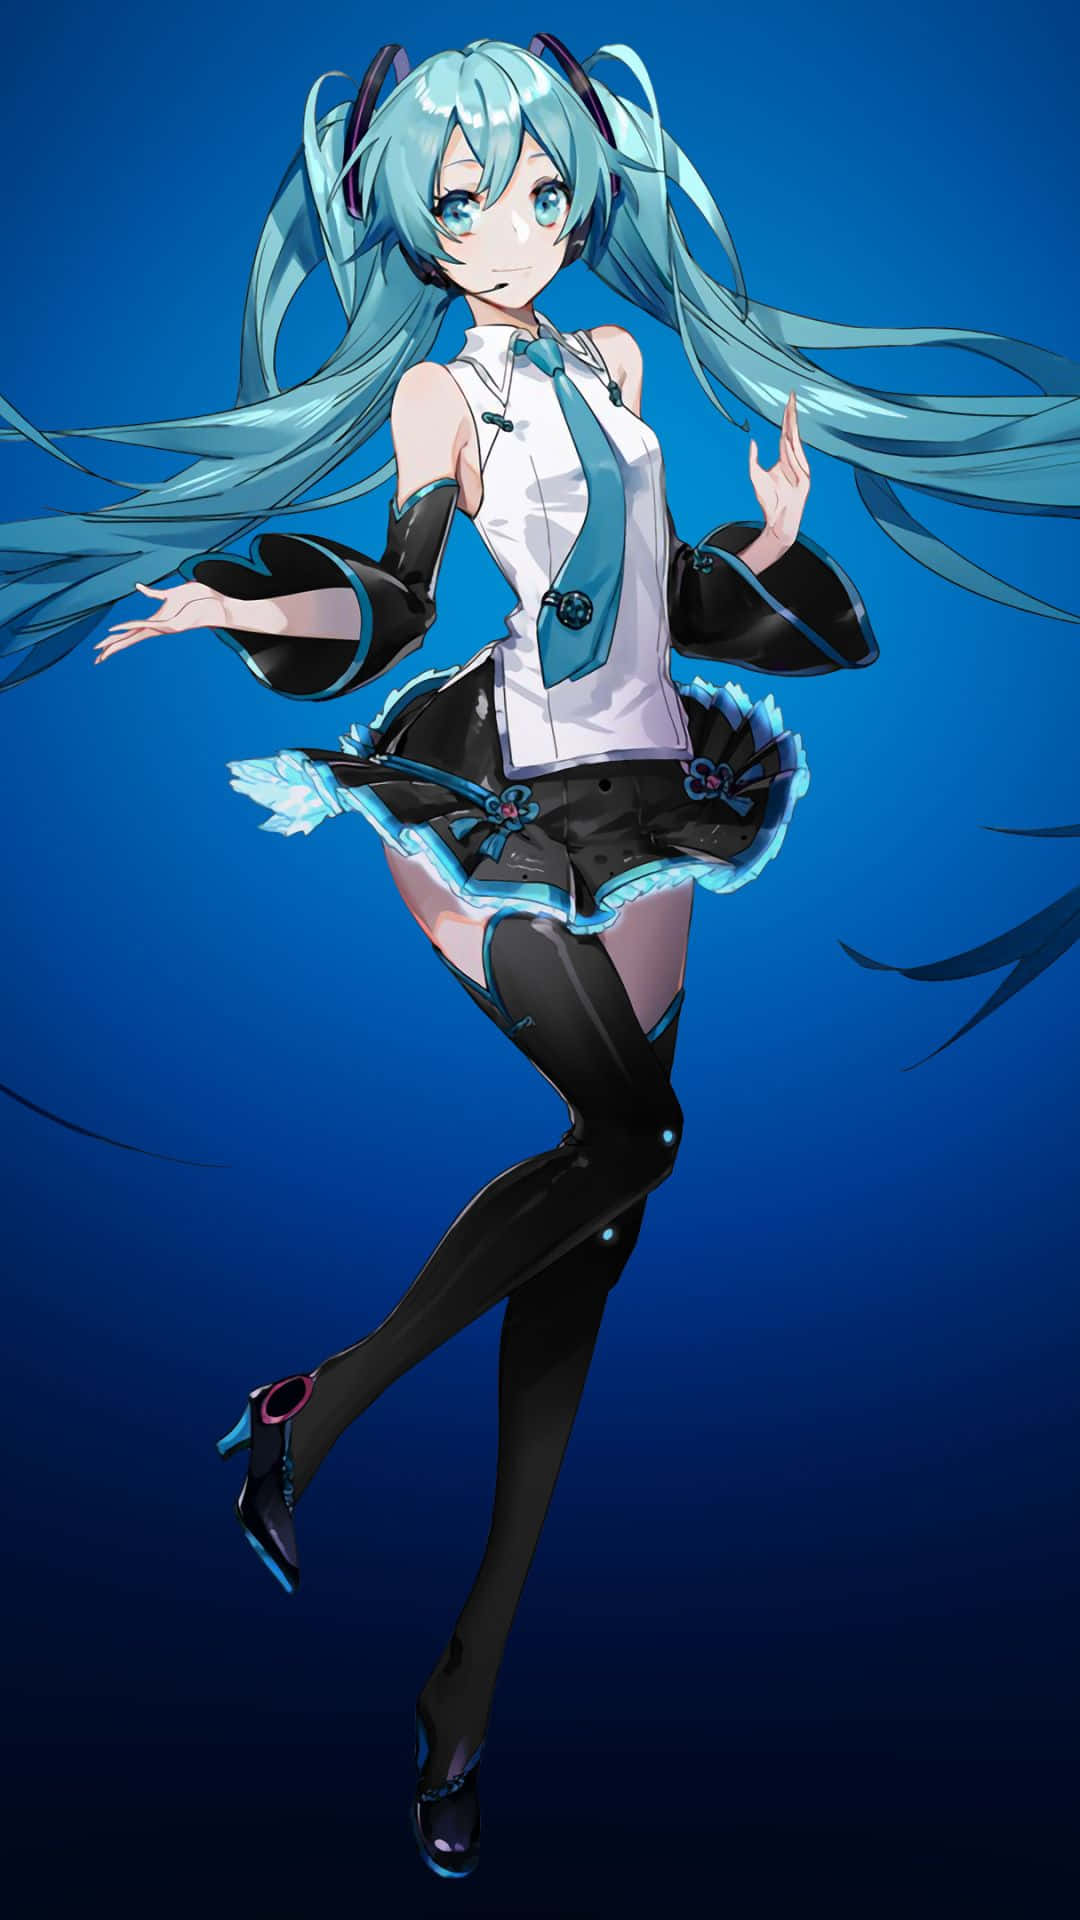 Let the digital world of Hatsune Miku come to you with this phone! Wallpaper